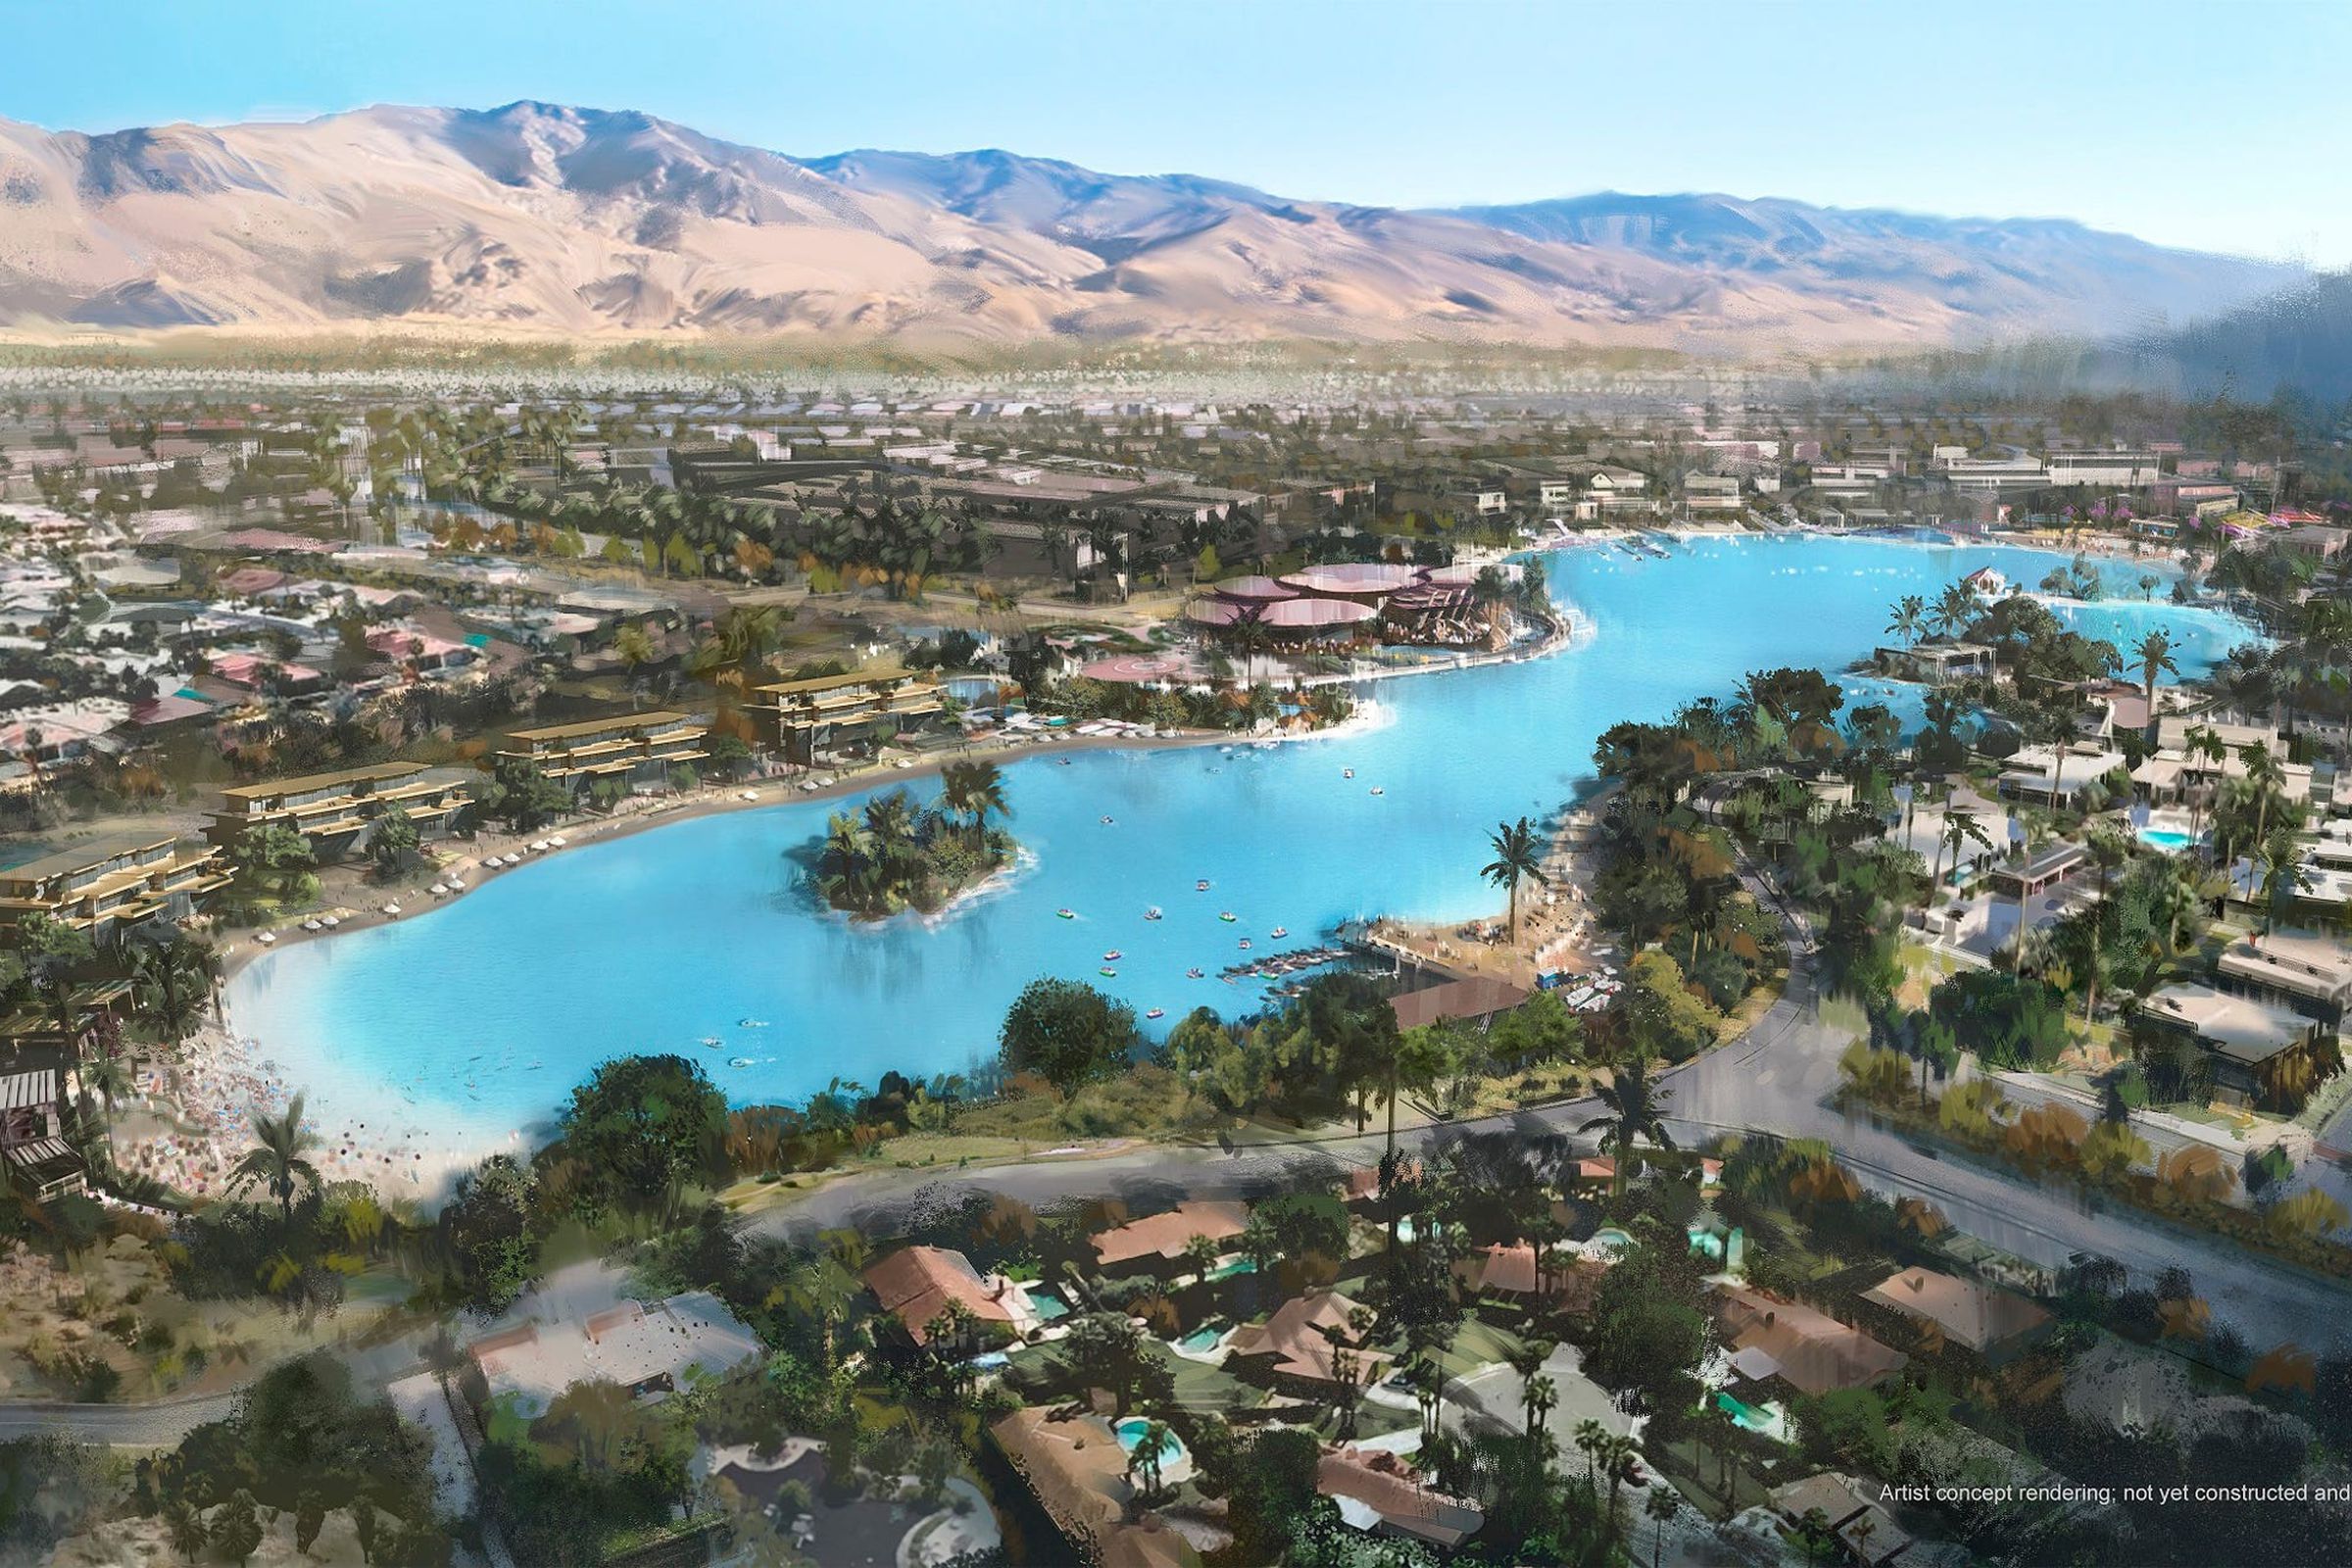 Concept art for Disney’s first planned “Storyliving” community: Cotino, California. 